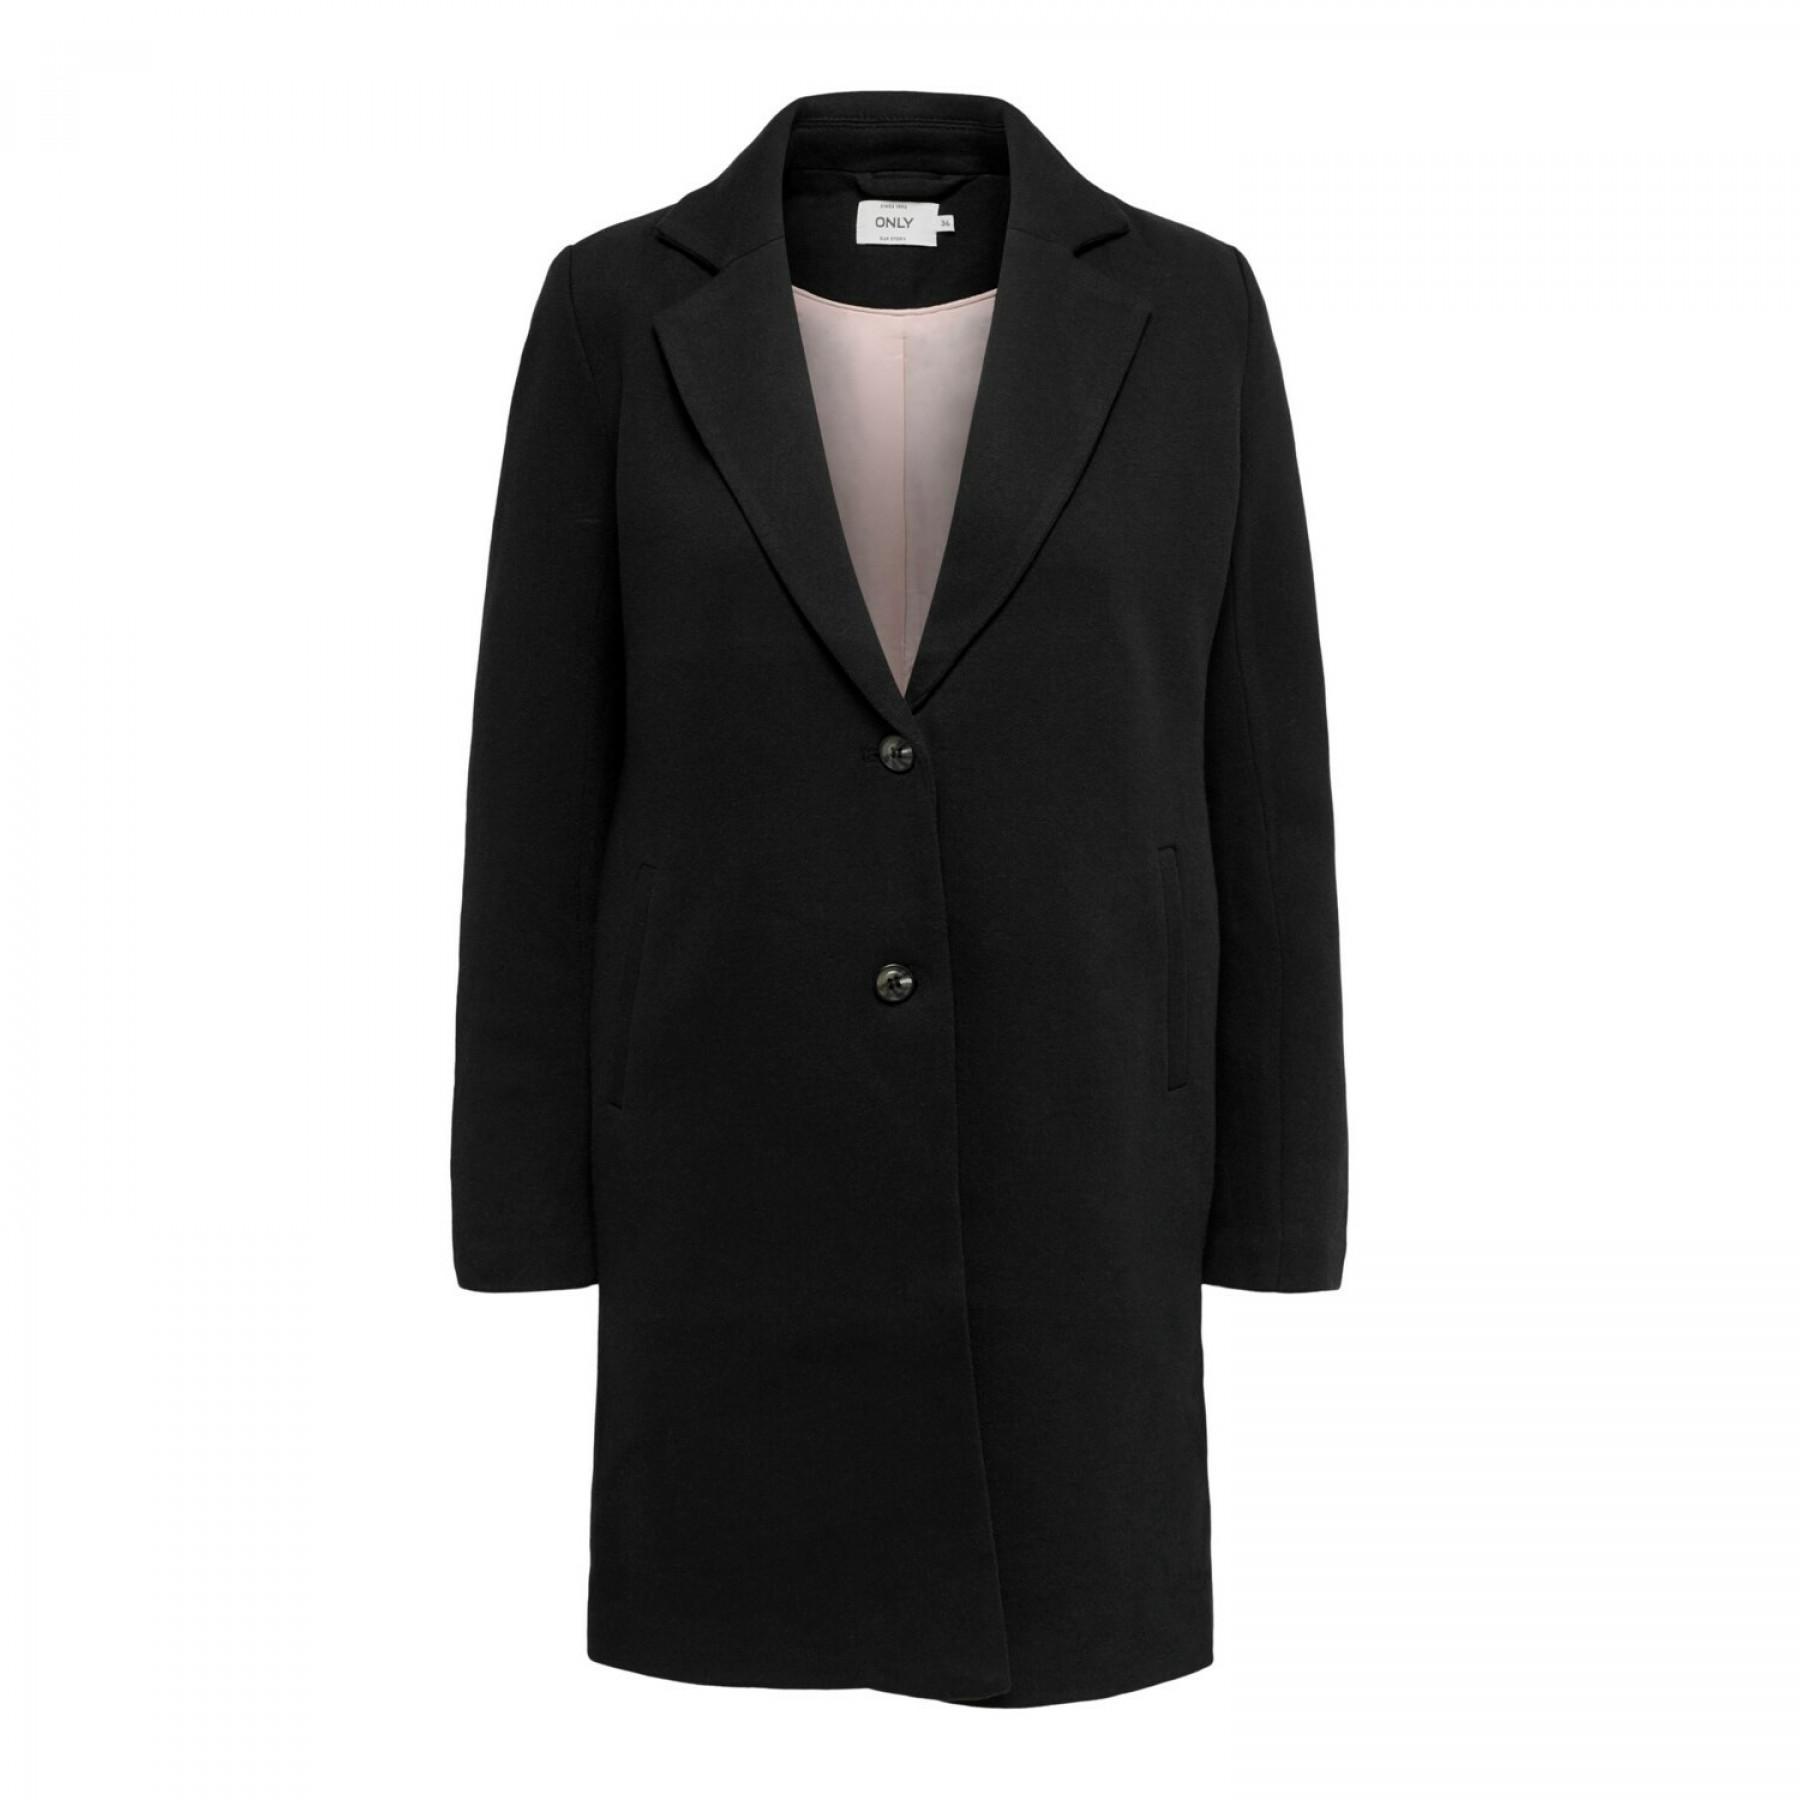 Manteau femme Only onlcarrie life